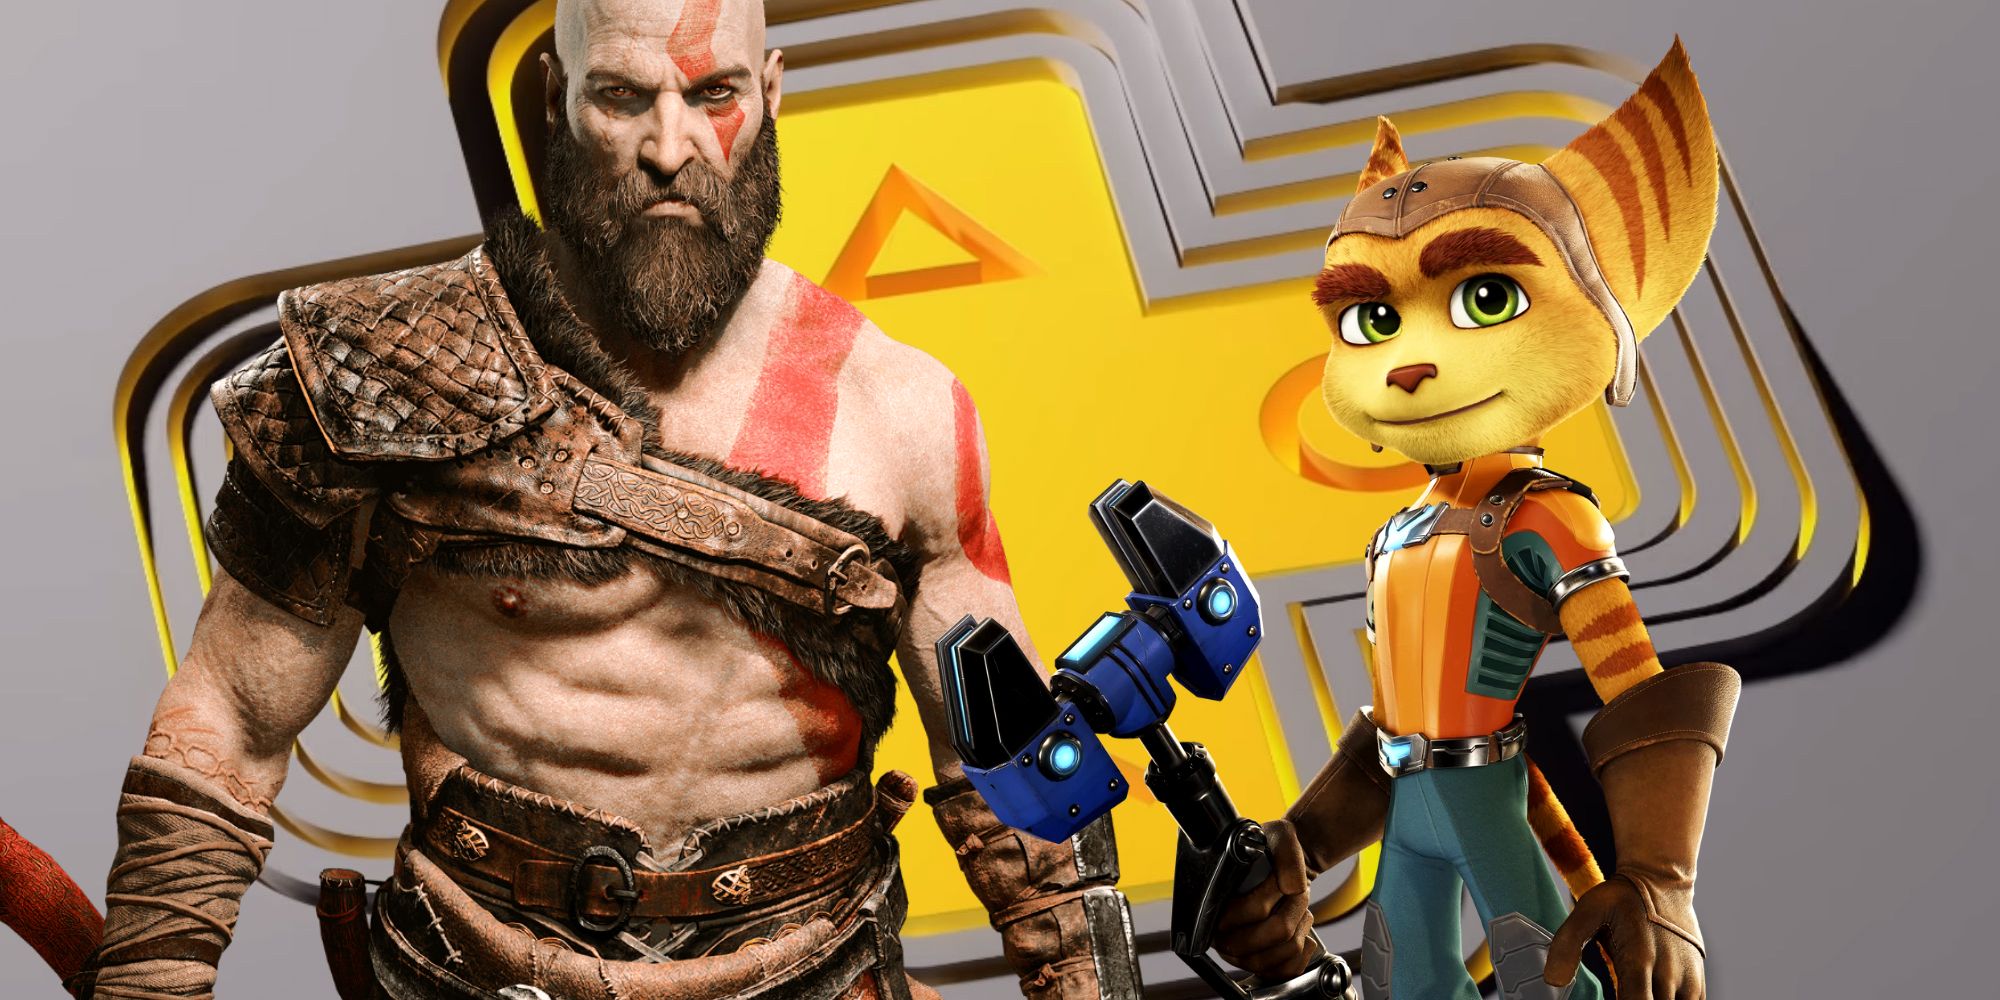 The PlayStation Plus Collection Is Going Away On May 9, 2023